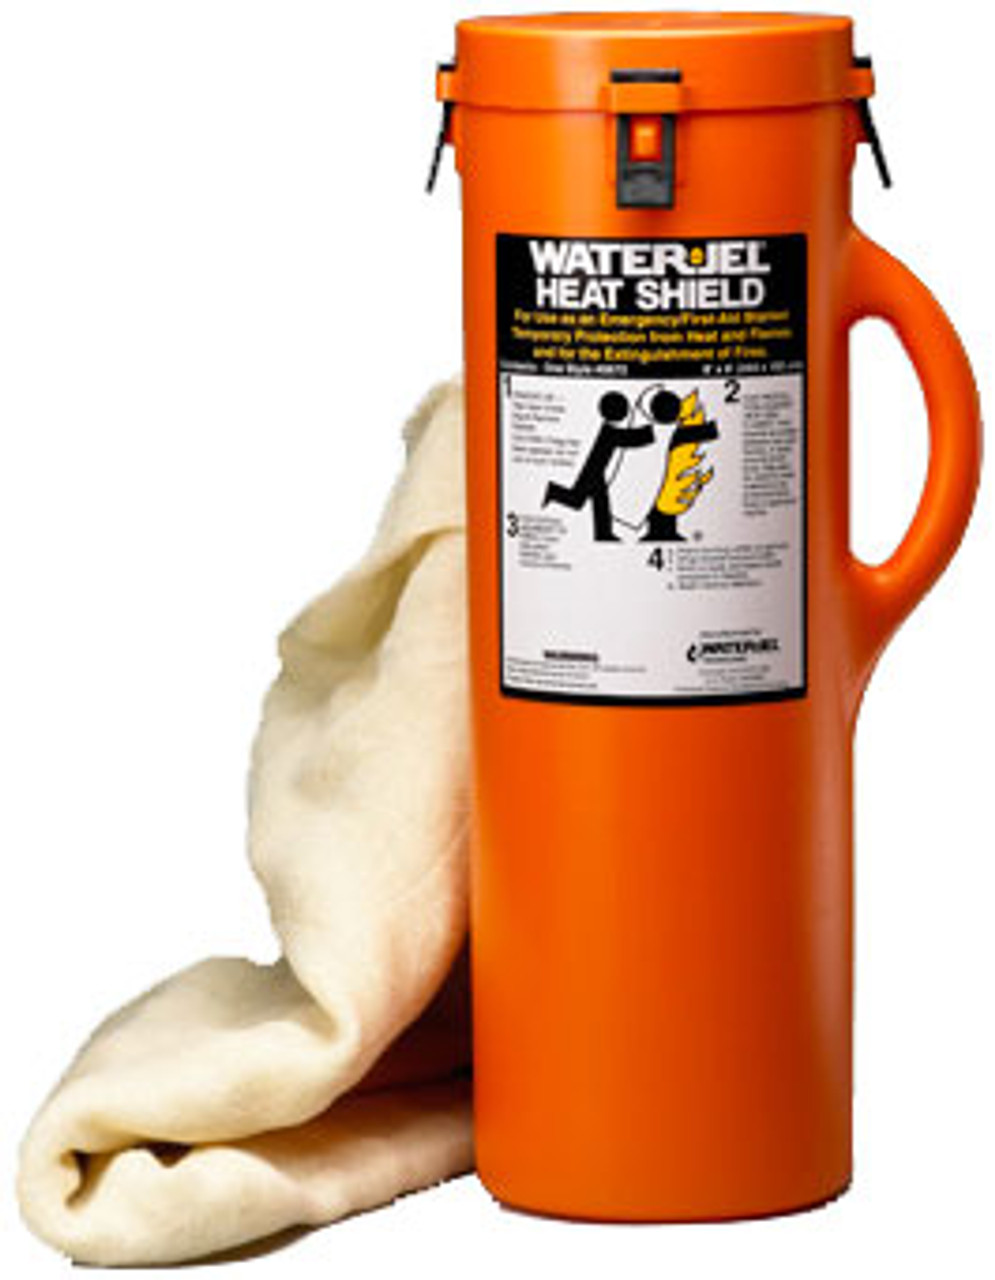 First Aid Only 7260-1 Water Jel Heat Shield Fire Extinguishing Blanket